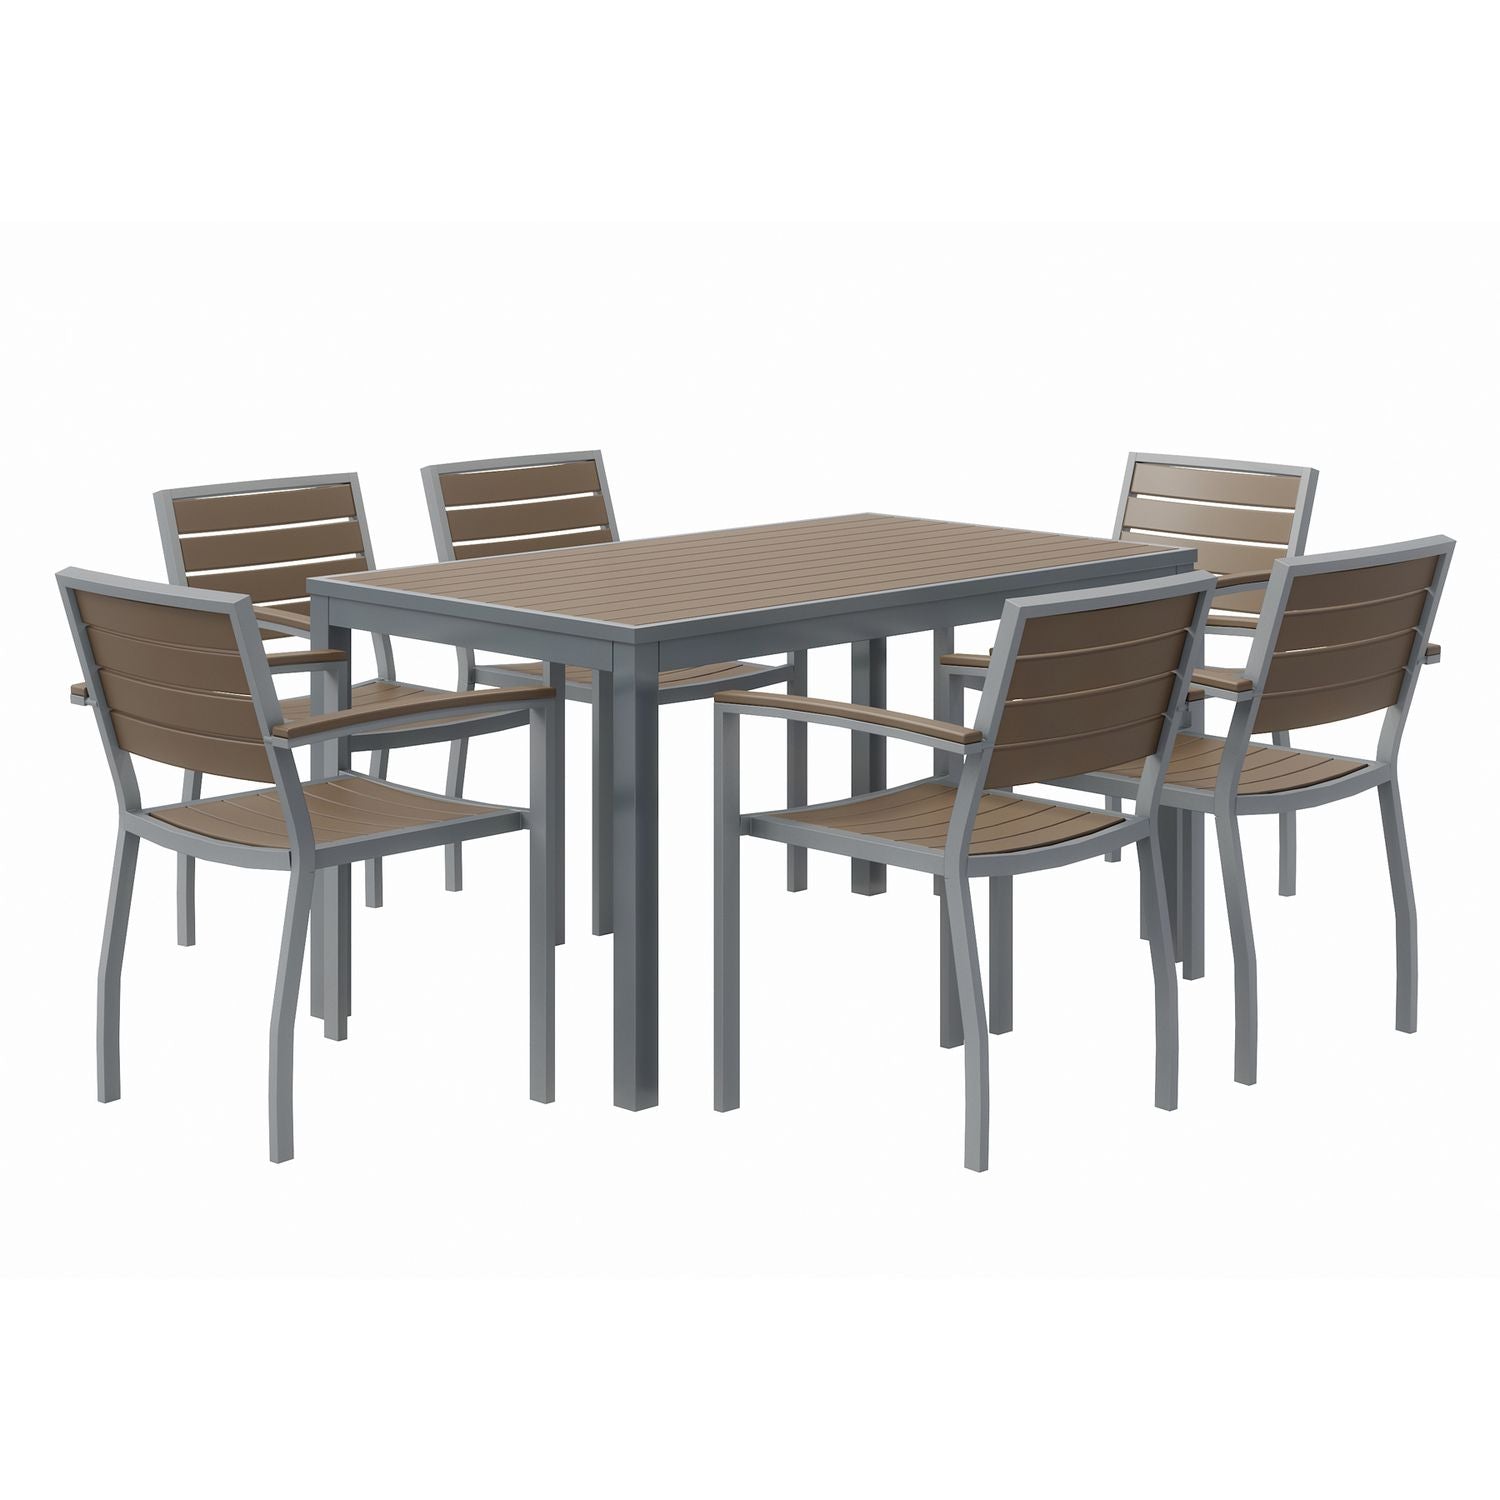 eveleen-outdoor-patio-table-with-six-mocha-powder-coated-polymer-chairs-32-x-55-x-29-mocha-ships-in-4-6-business-days_kfi840031918529 - 1